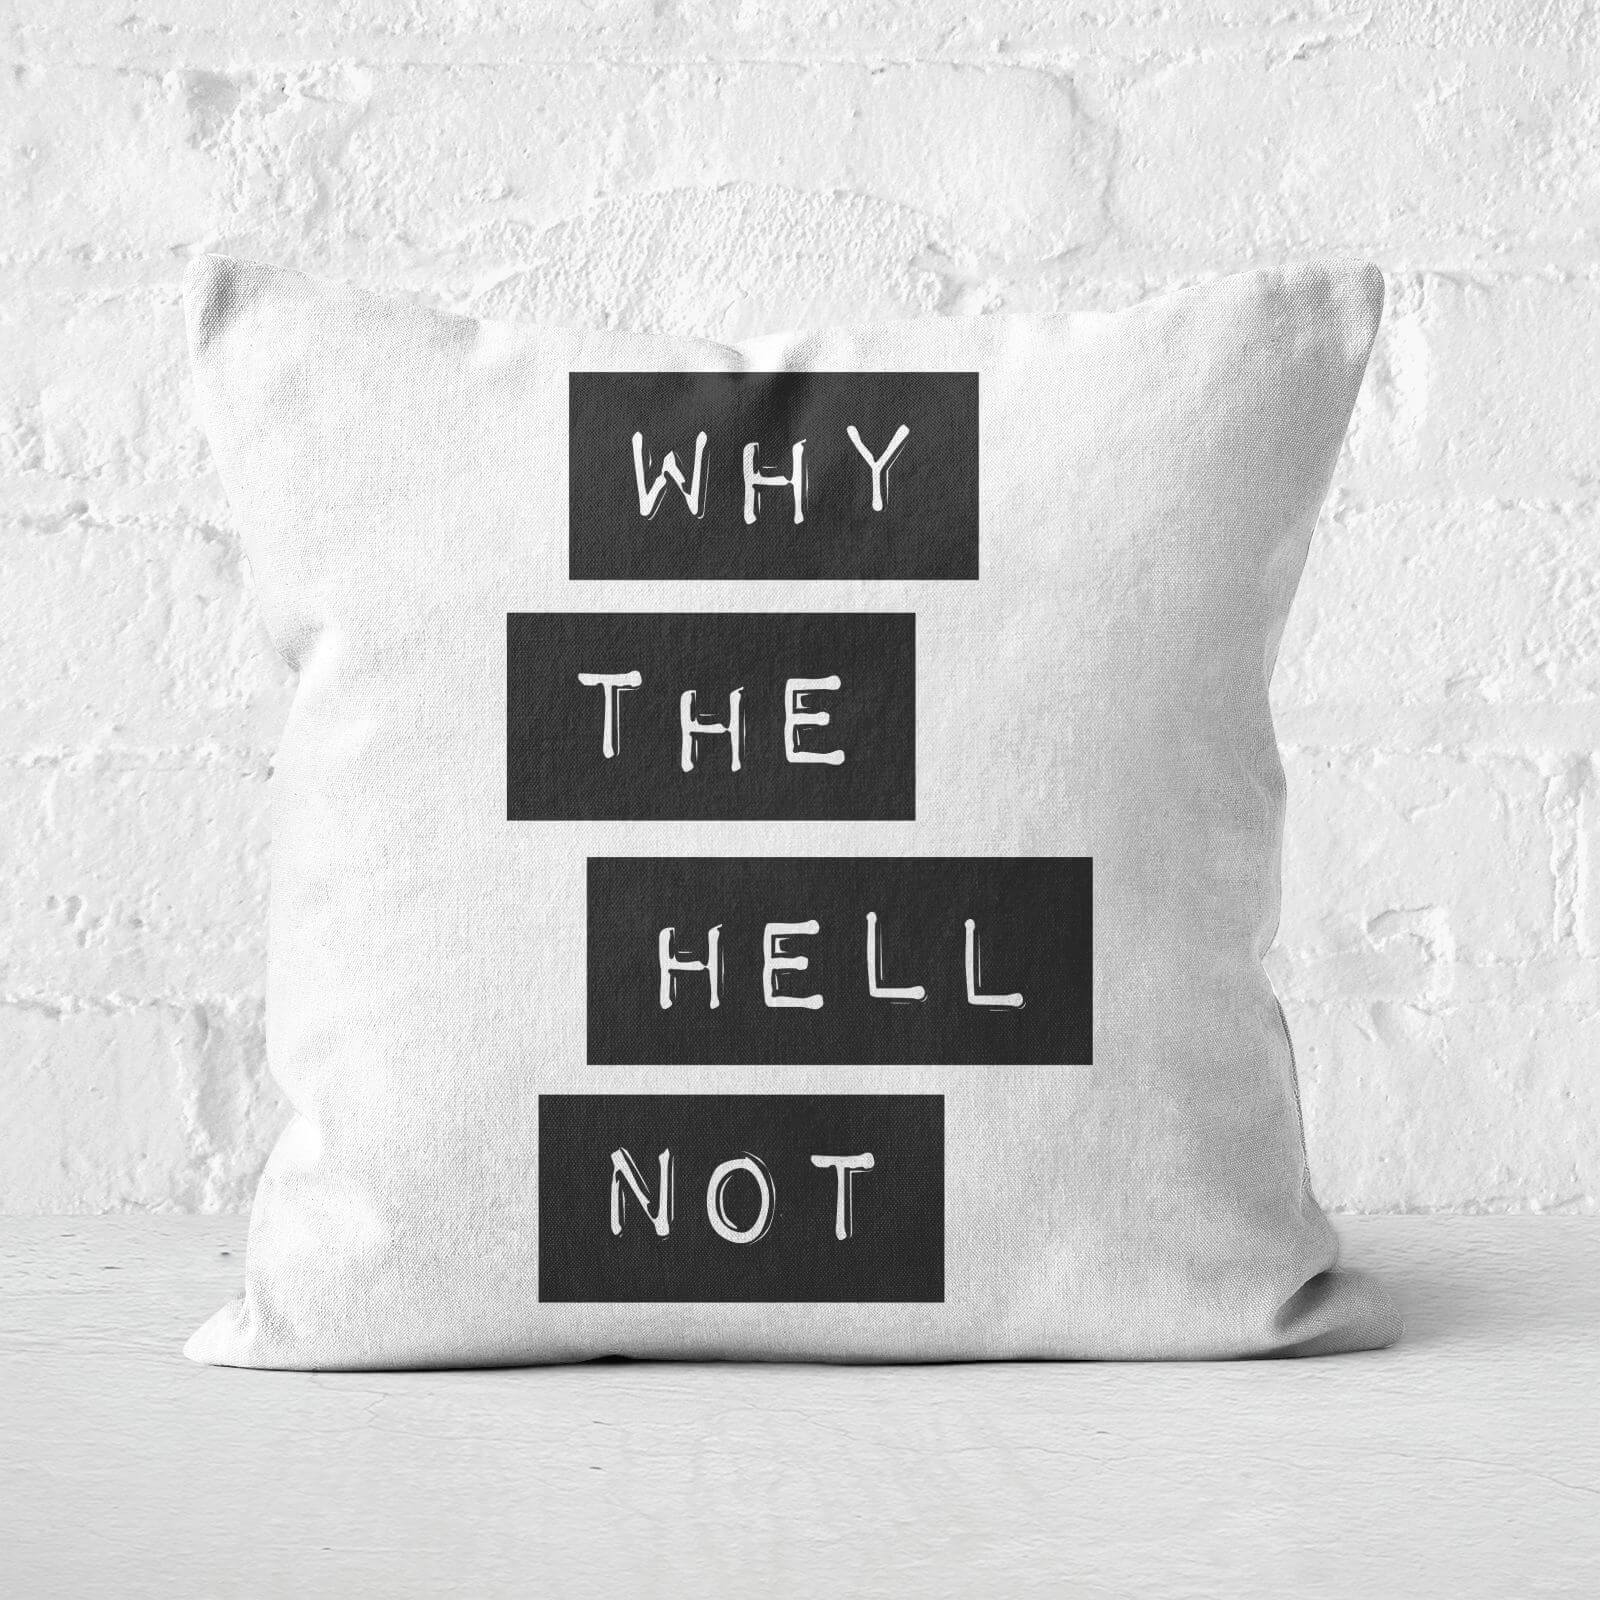 The Motivated Type Why The Hell Not Square Cushion - 60x60cm - Soft Touch